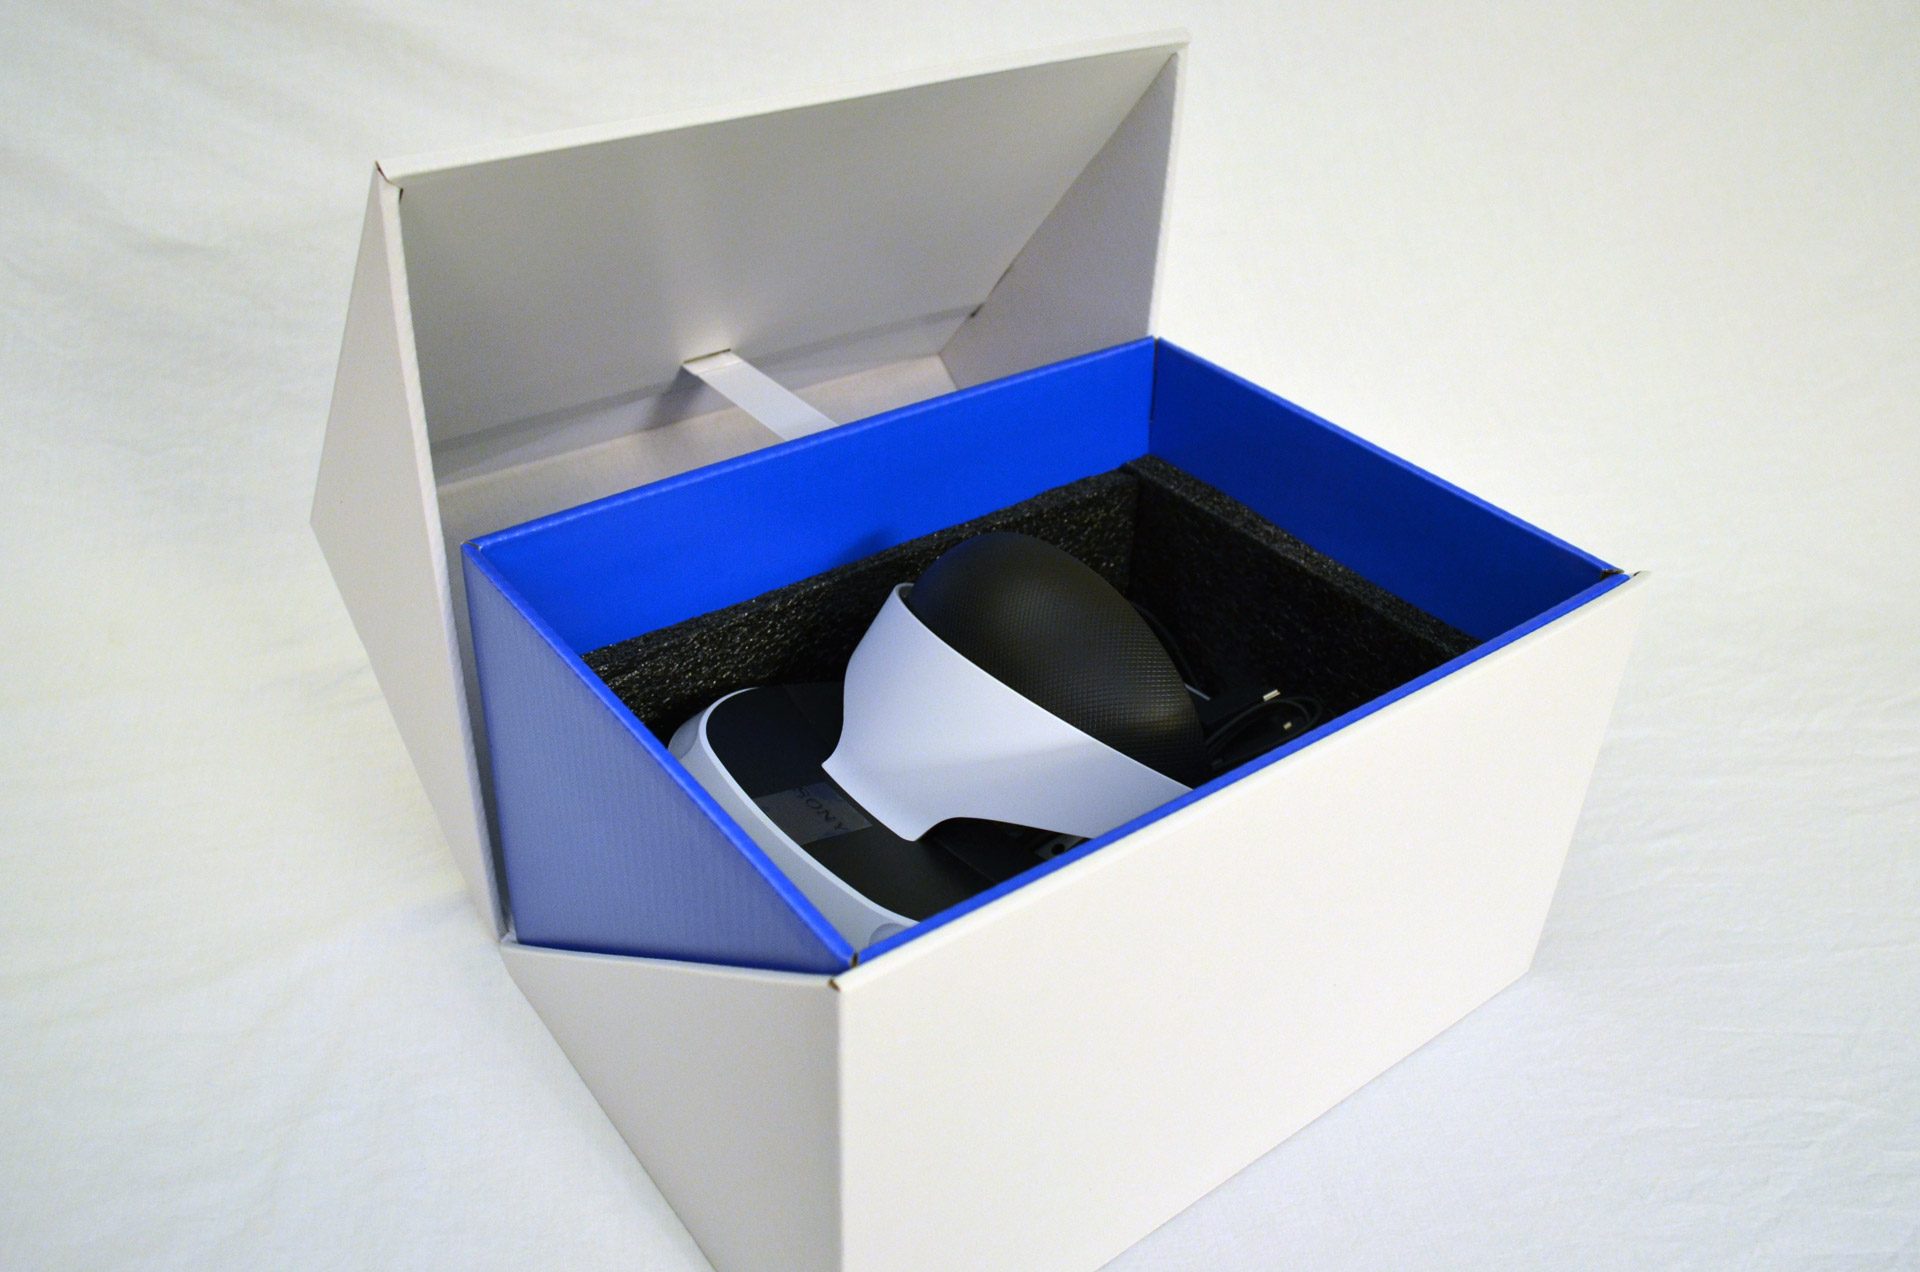 playstation-vr-review-unboxing-27.jpg